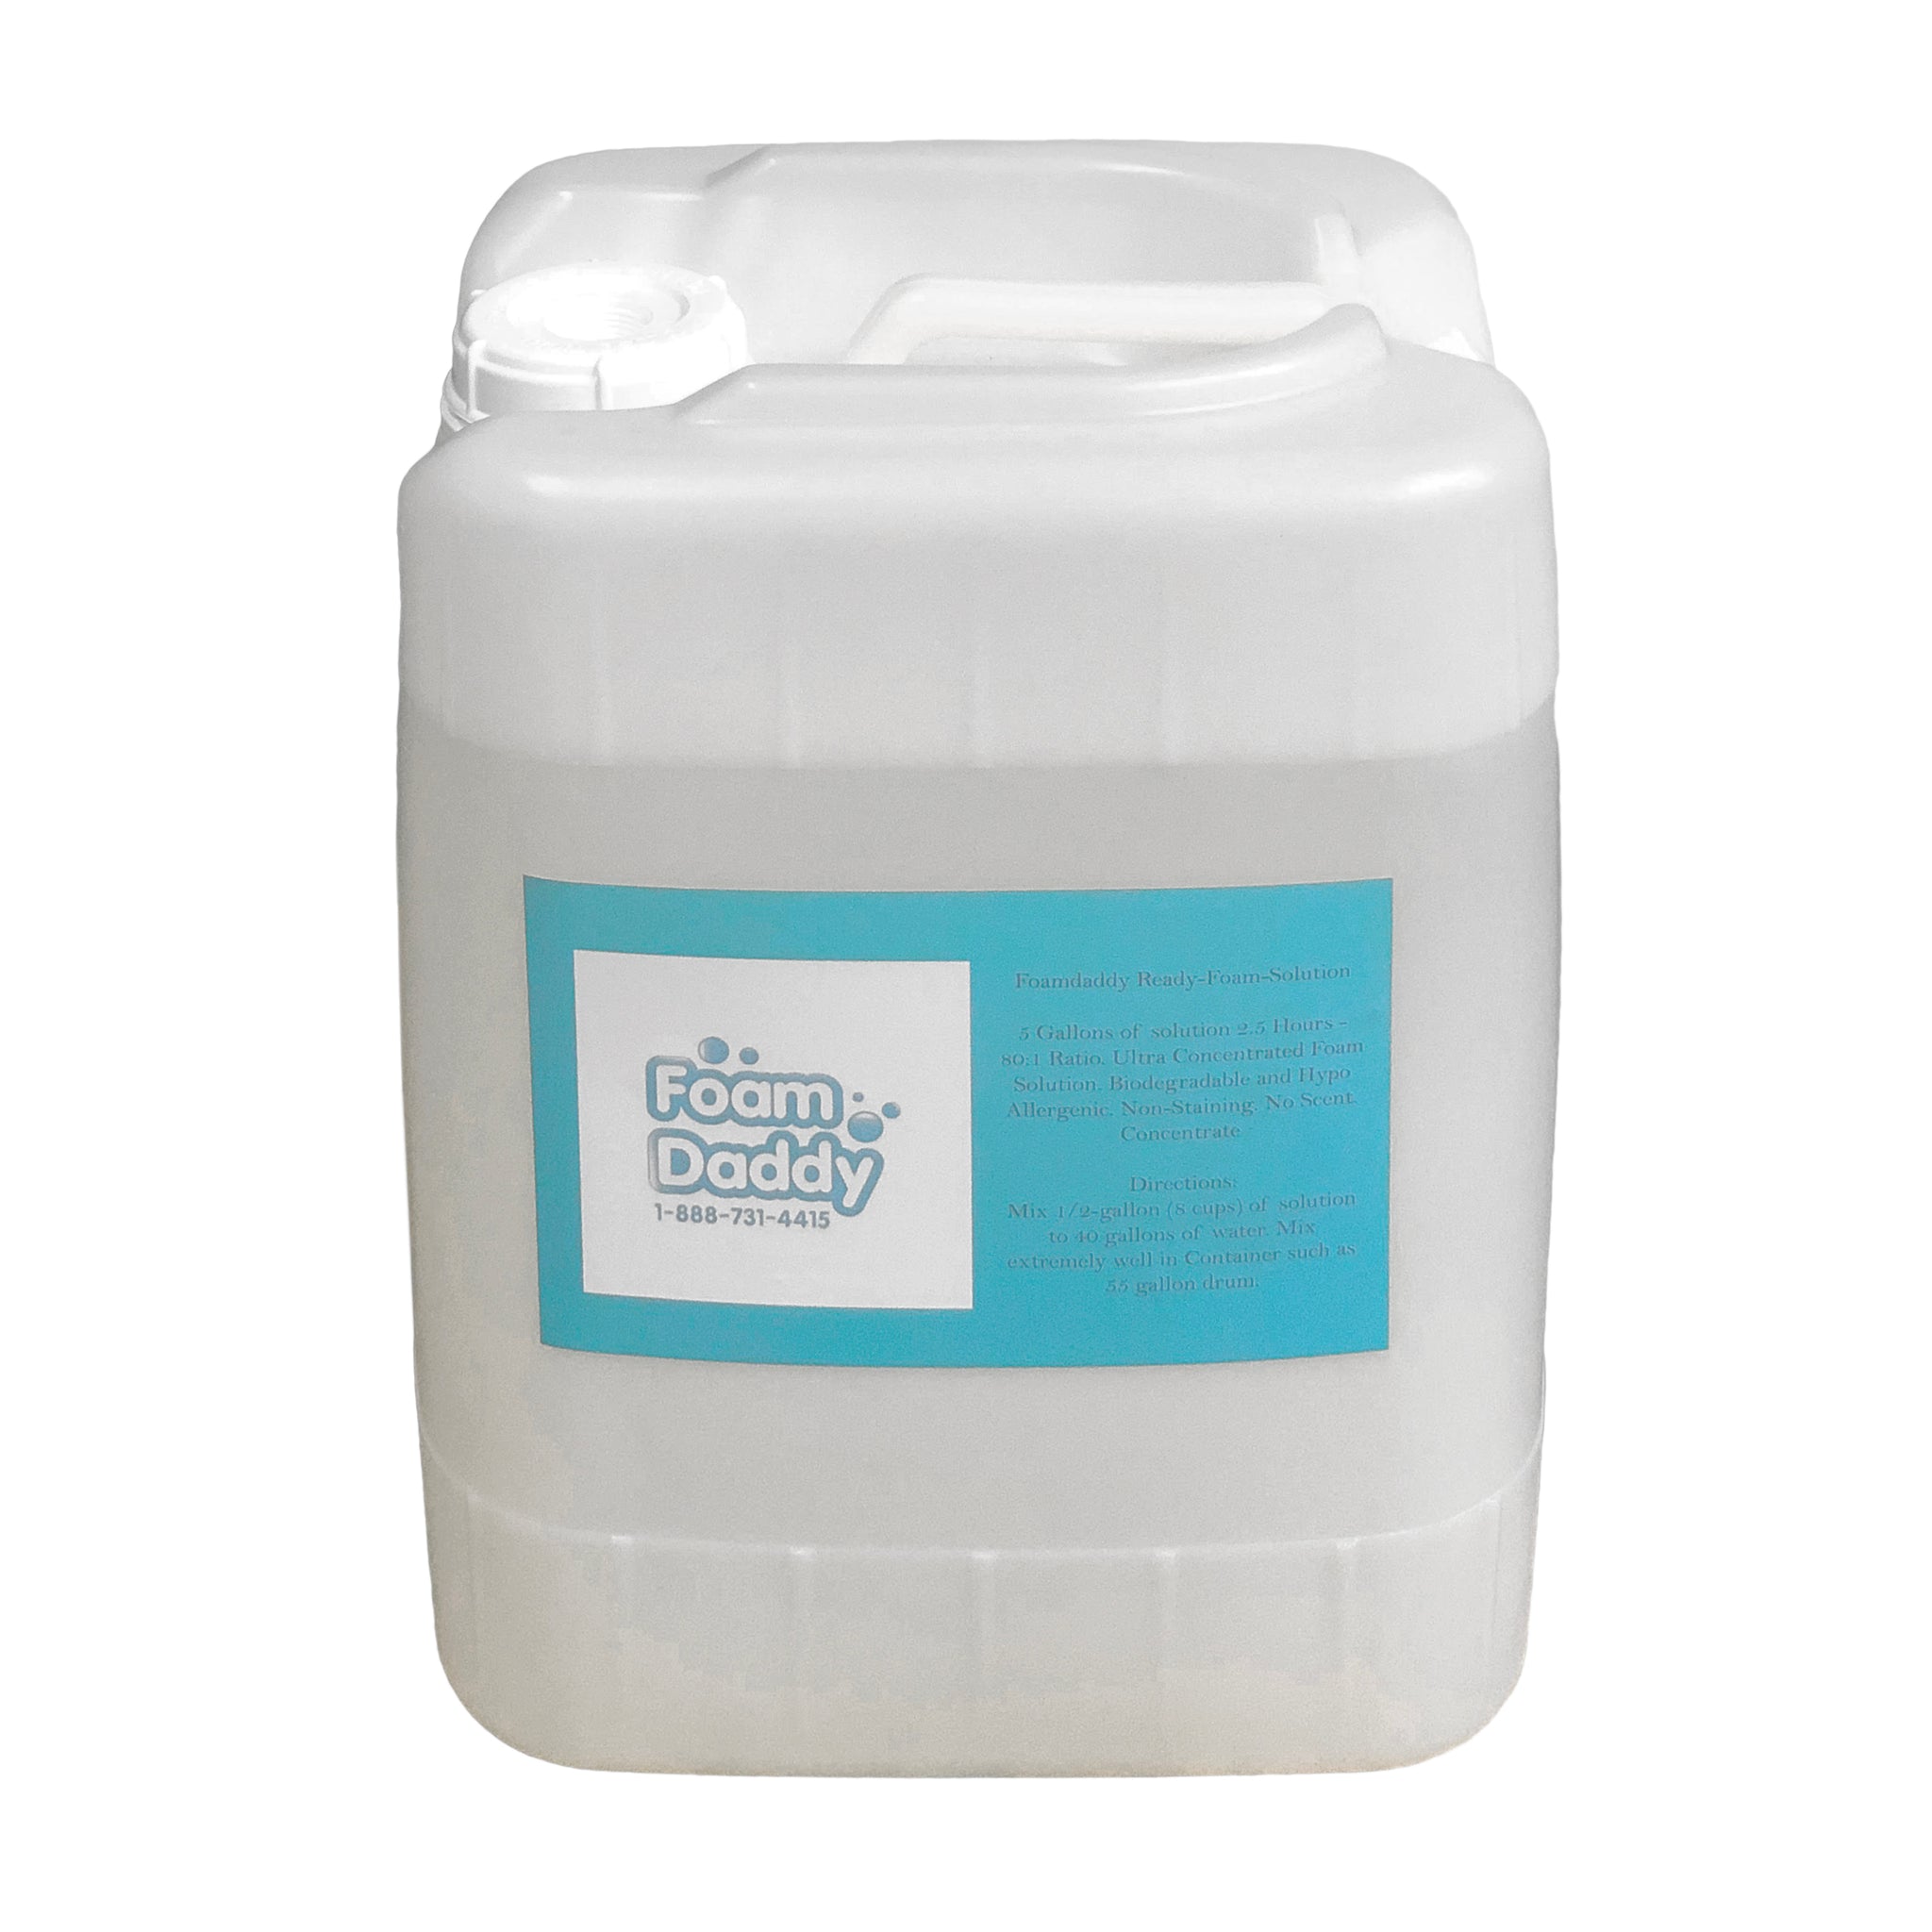 Foam Powder Pack of 5, Makes Up to 600 Gallons of Foam Party Fun for Foam Machines by Dr. Party